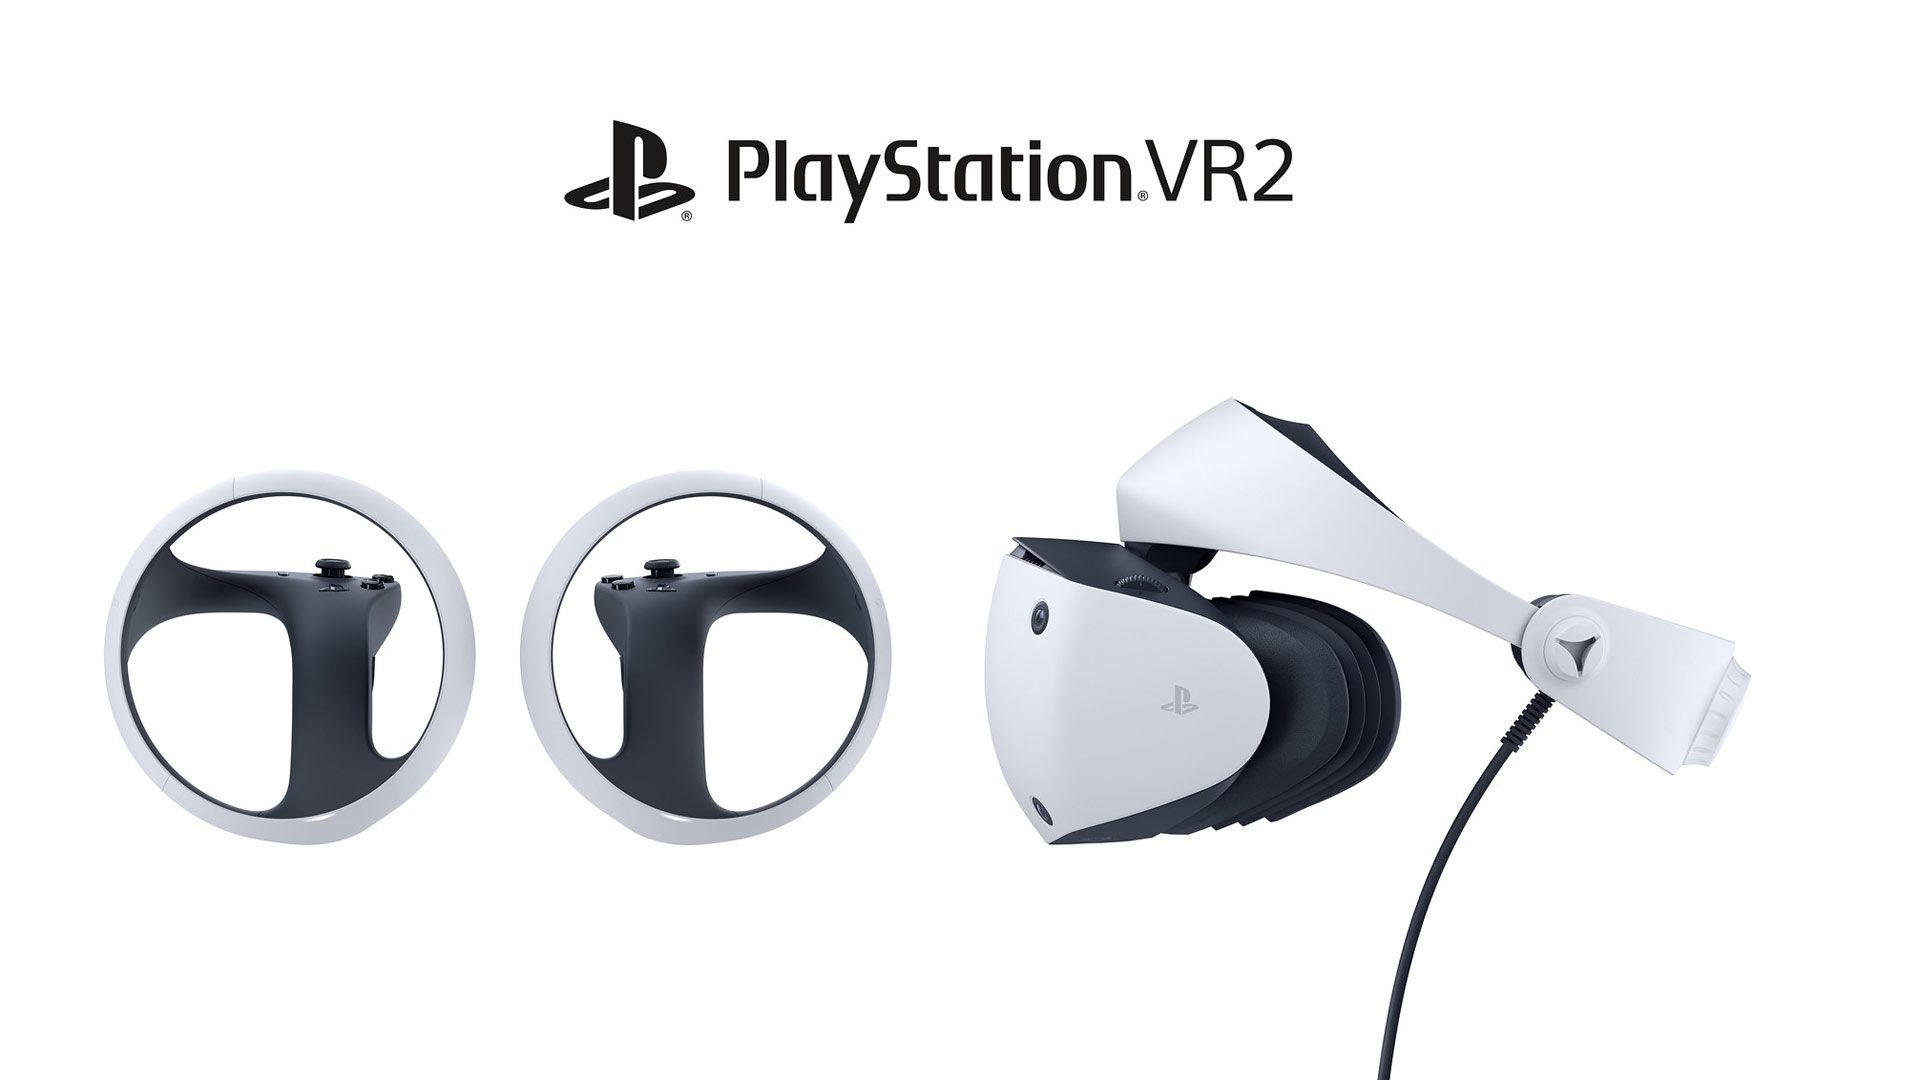 PSVR 2 has had a disappointing first year no matter how you slice